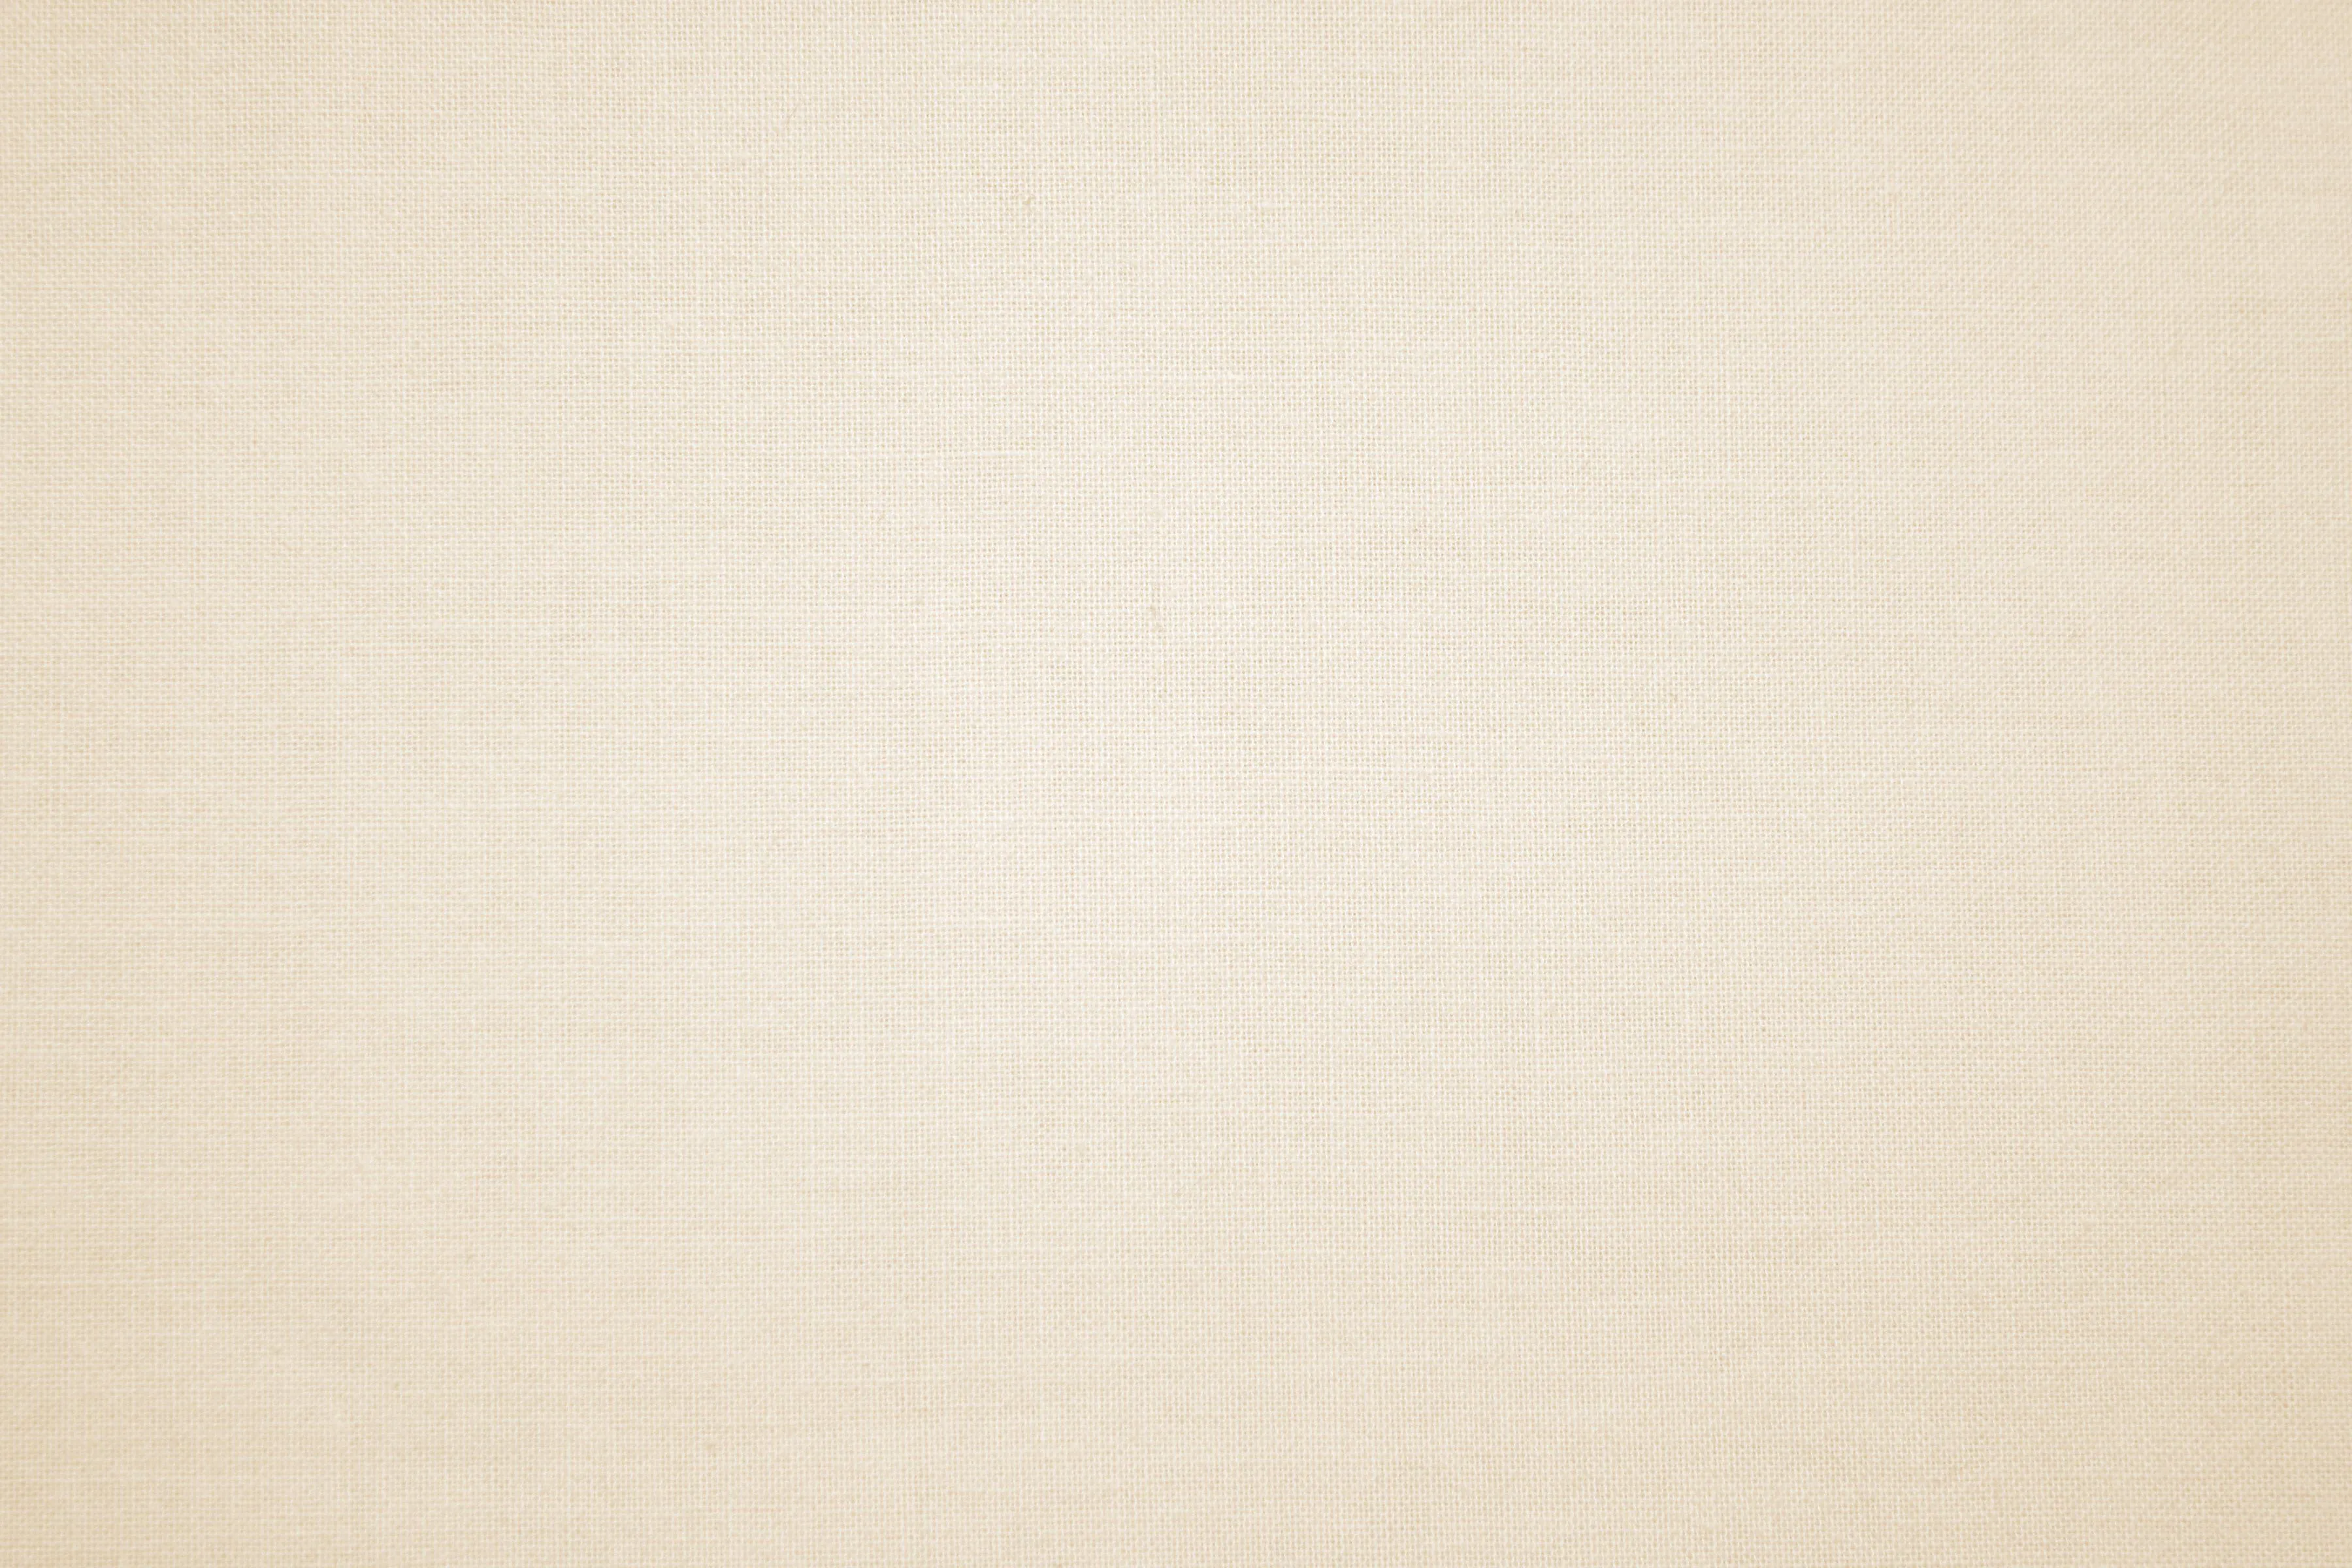 Beige Colored Canvas Fabric Texture Picture | Free Photograph | Photos ...